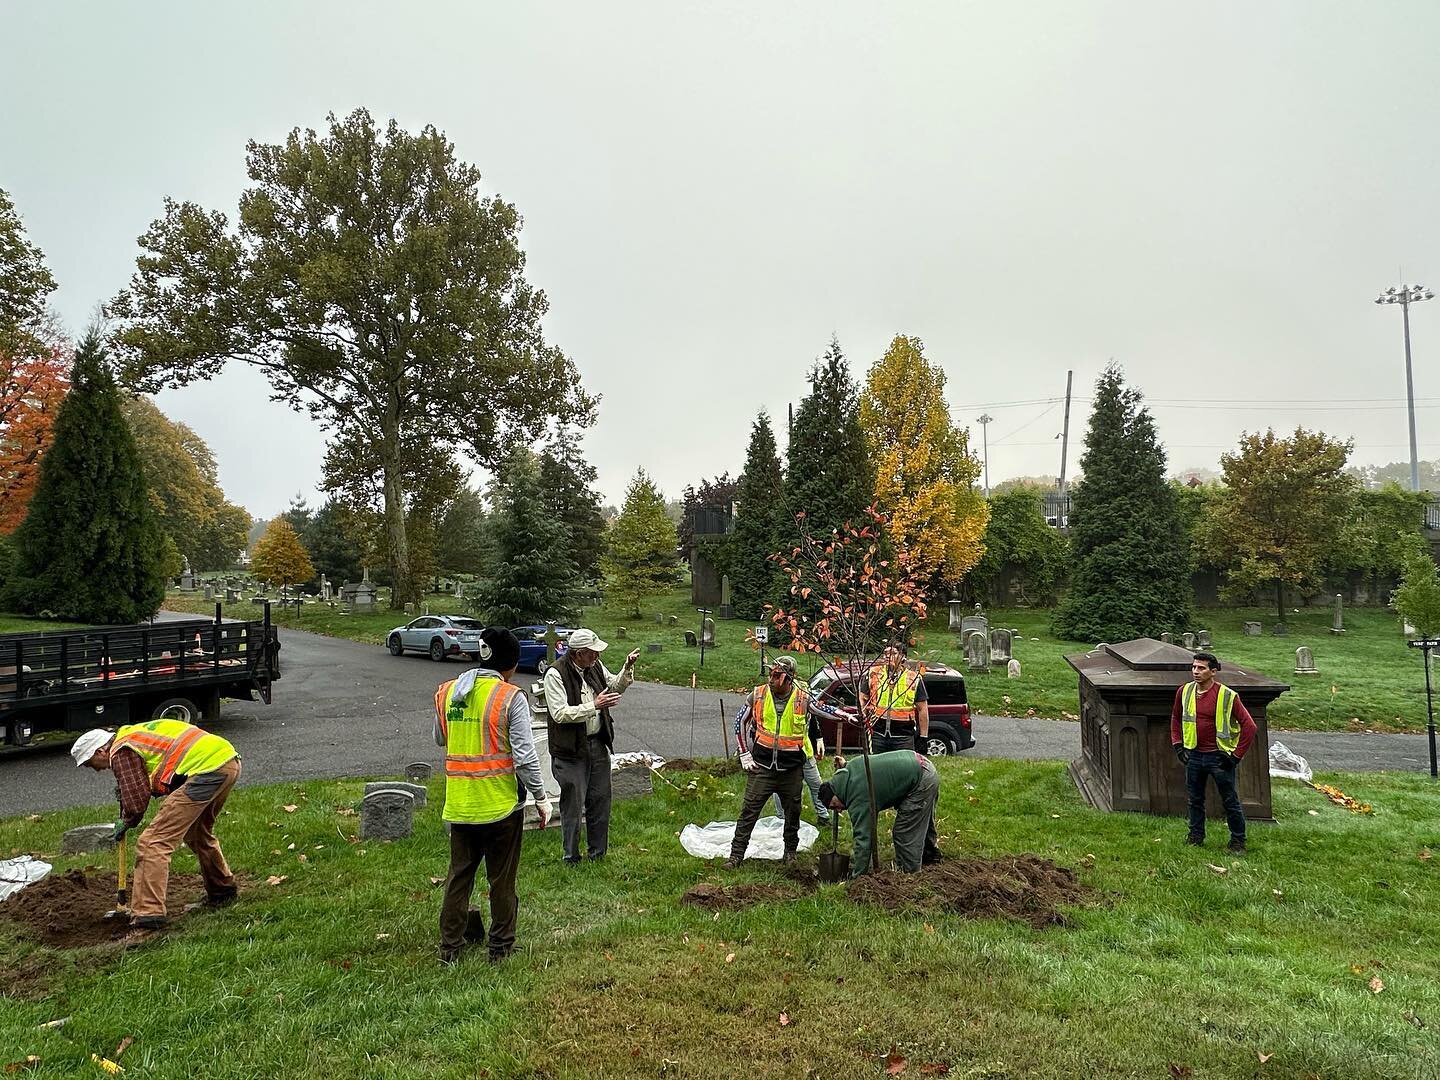 A beautiful foggy fall day for bare root planting at @historicgreenwood